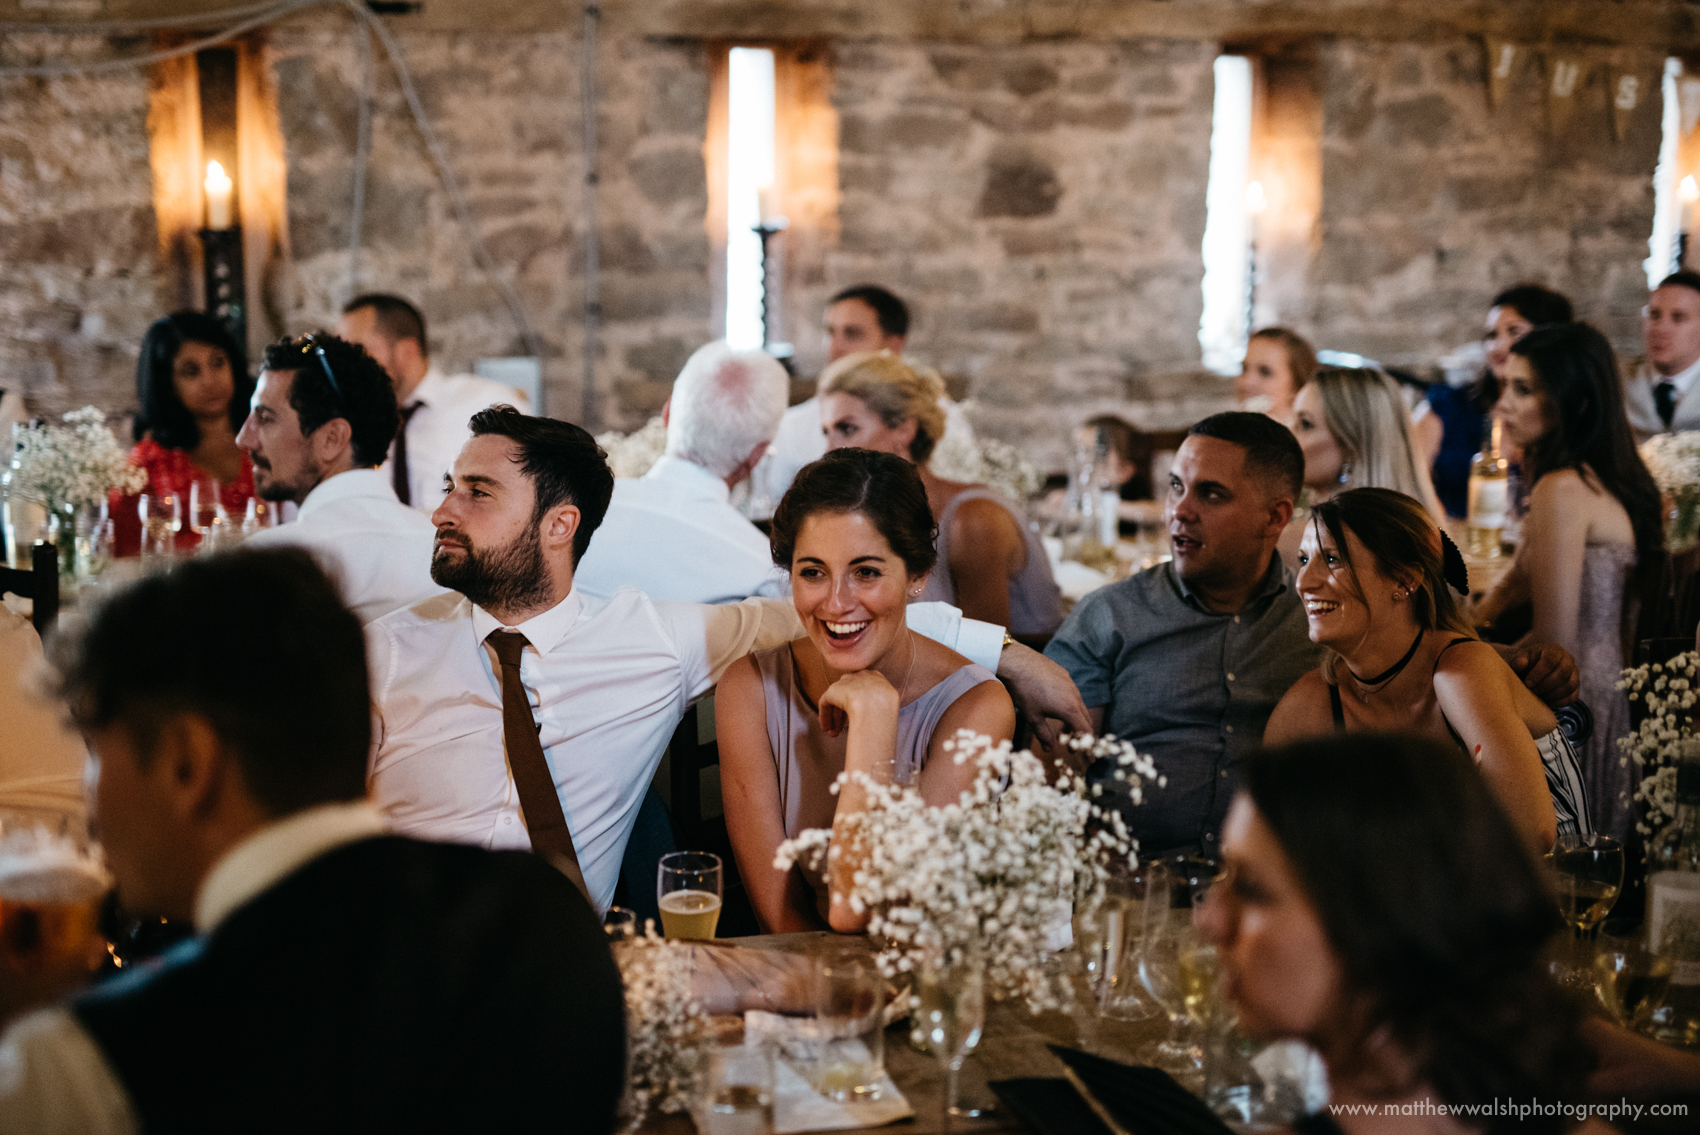 Guests find the best man speeches hilarious 